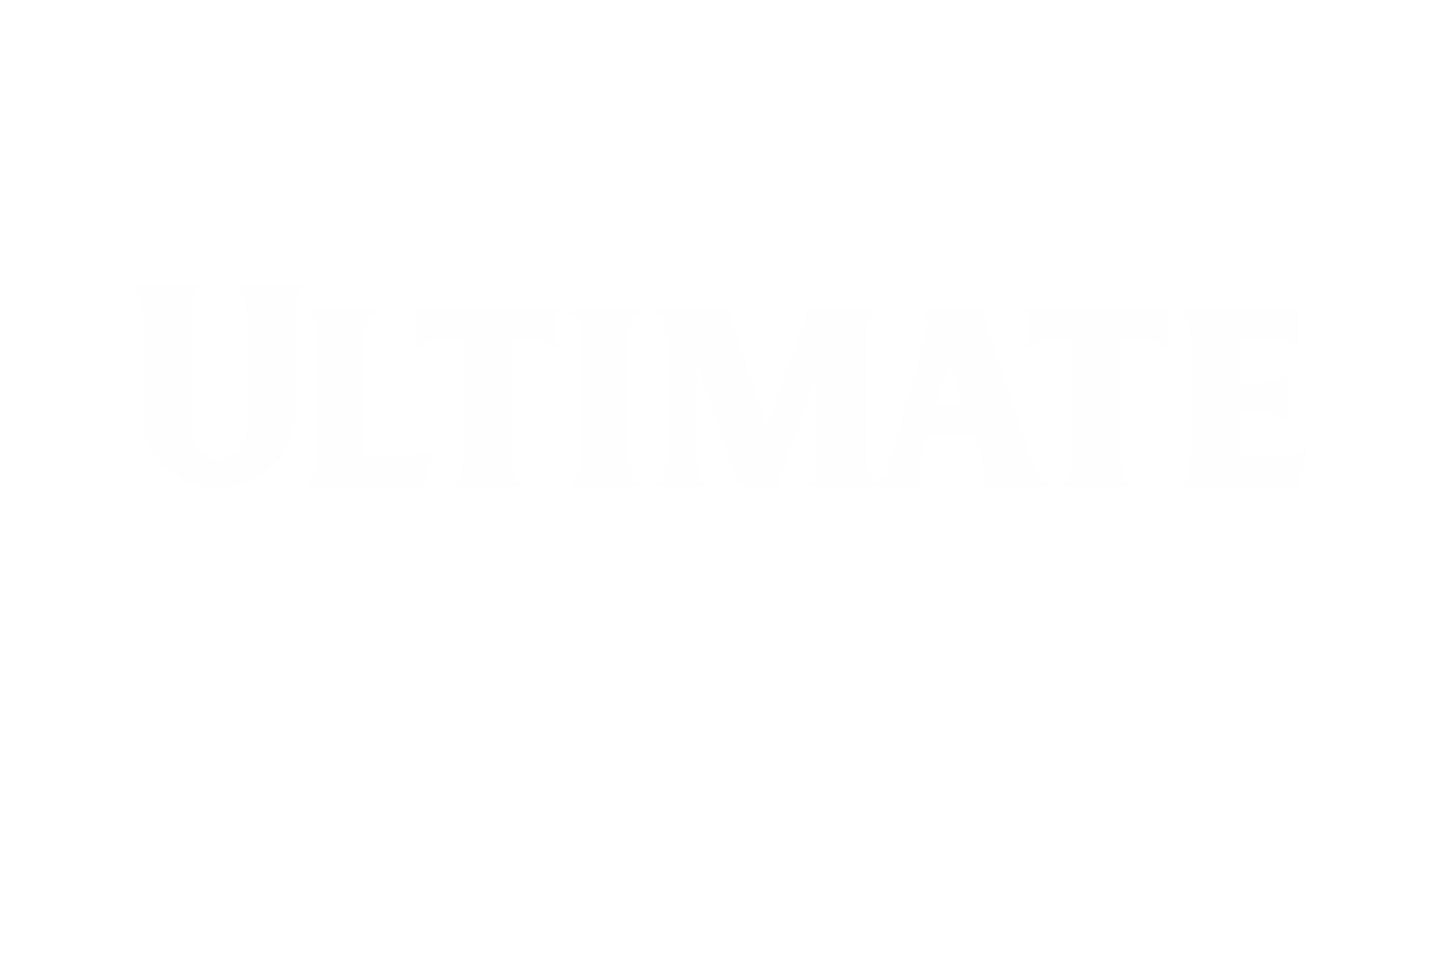 The Ultimate Thief